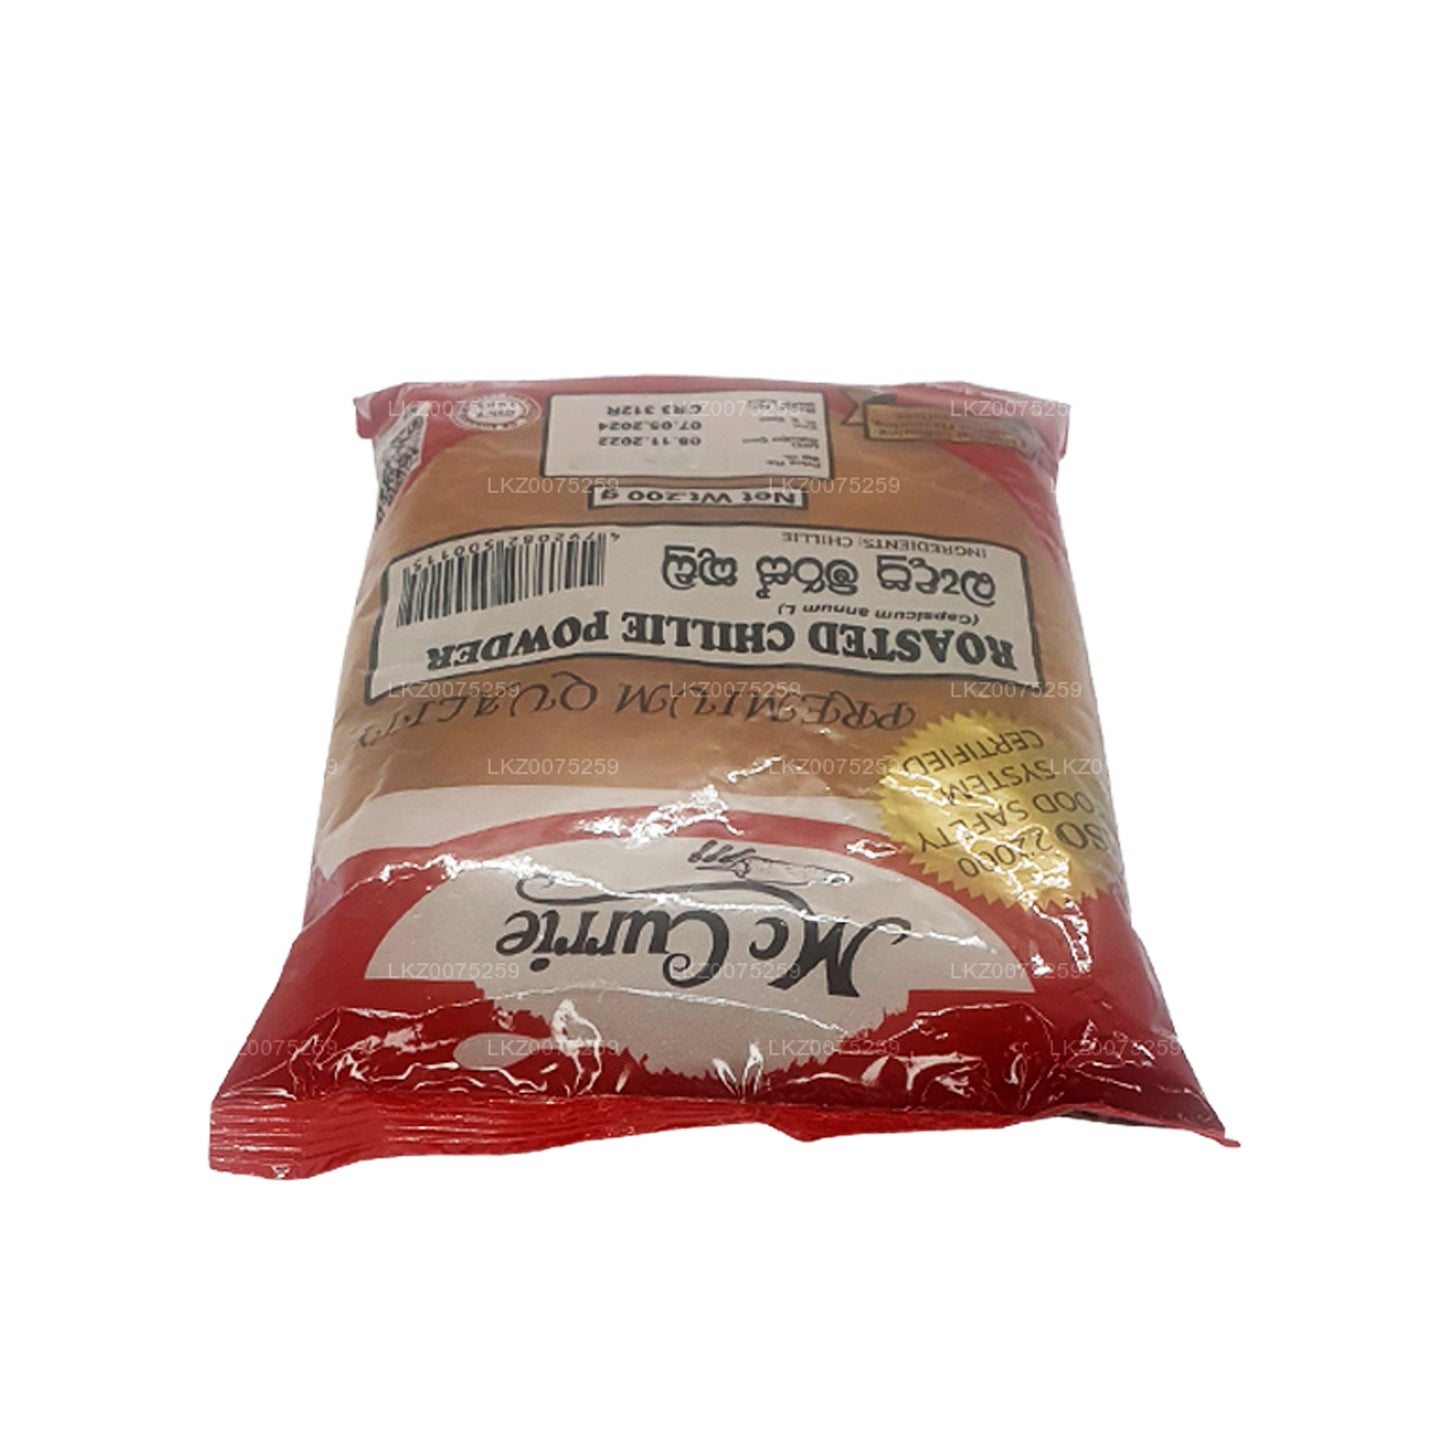 Mc Currie Roasted Chilli Powder (200g)